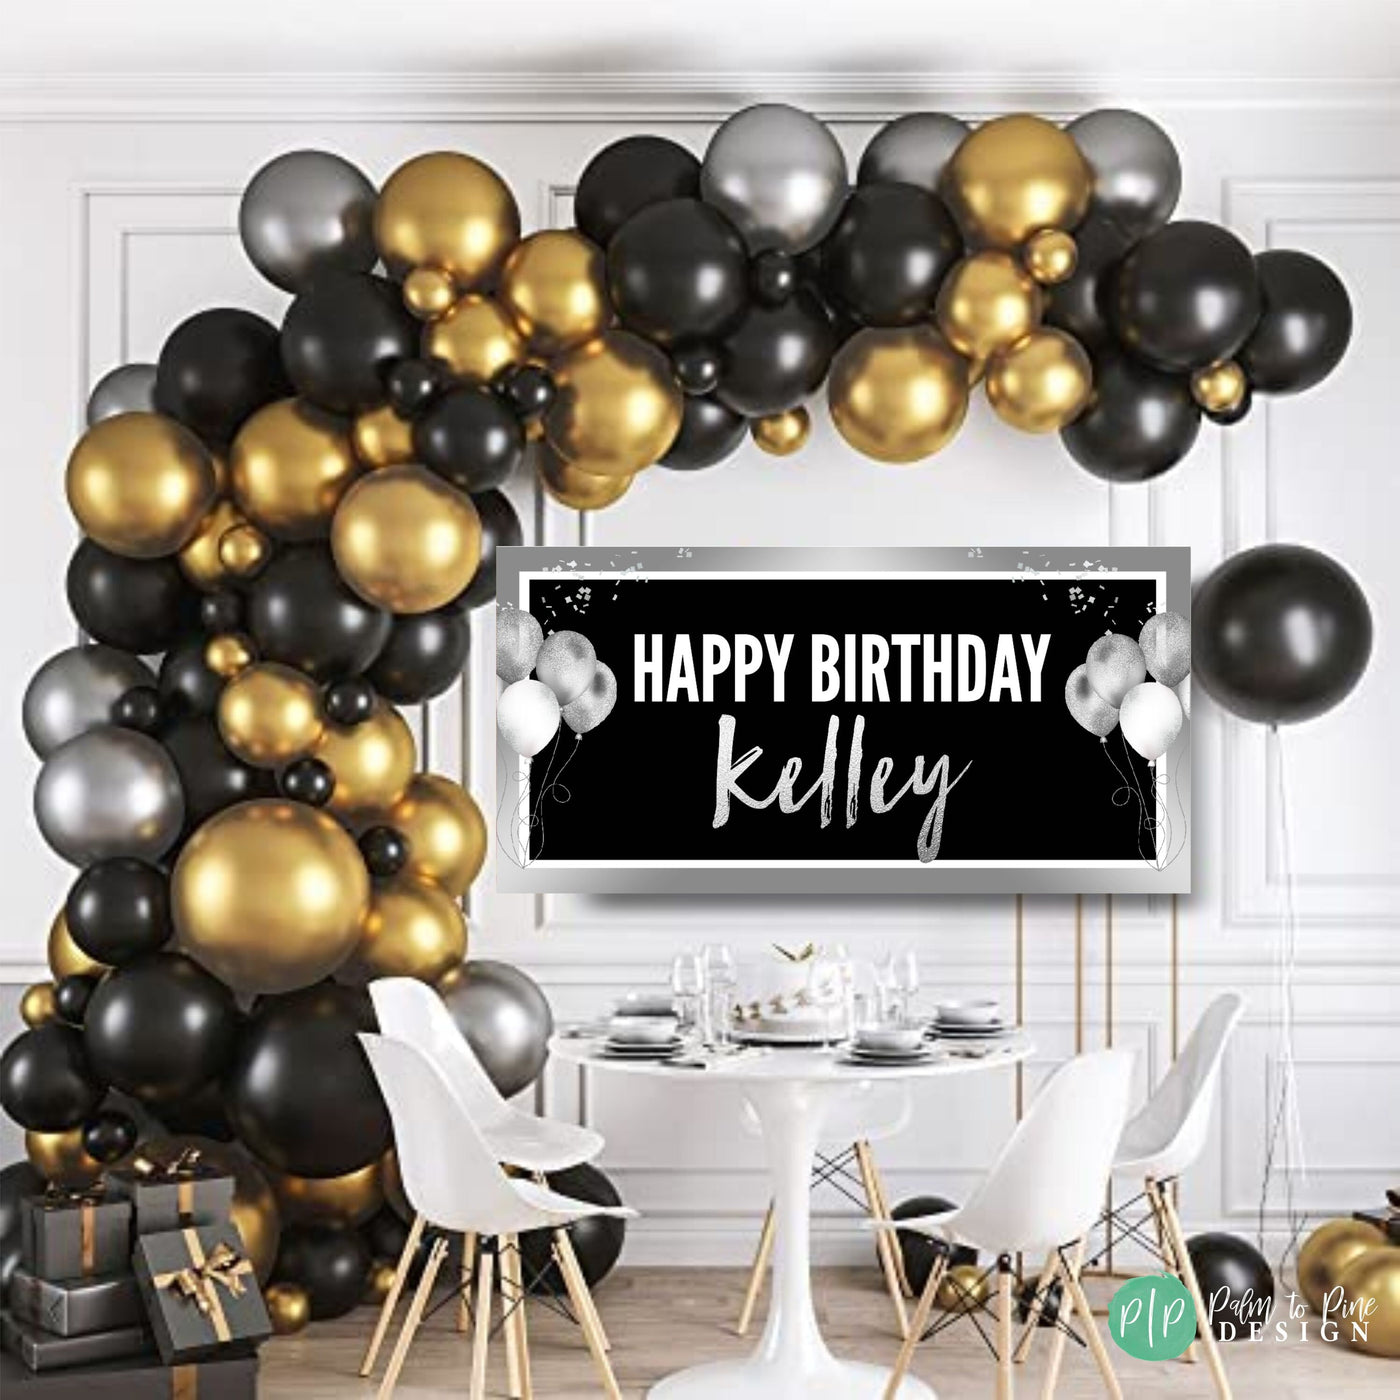 Black and Silver Birthday Banner, Happy birthday personalized banner, Custom black and white birthday banner, Black and White party backdrop